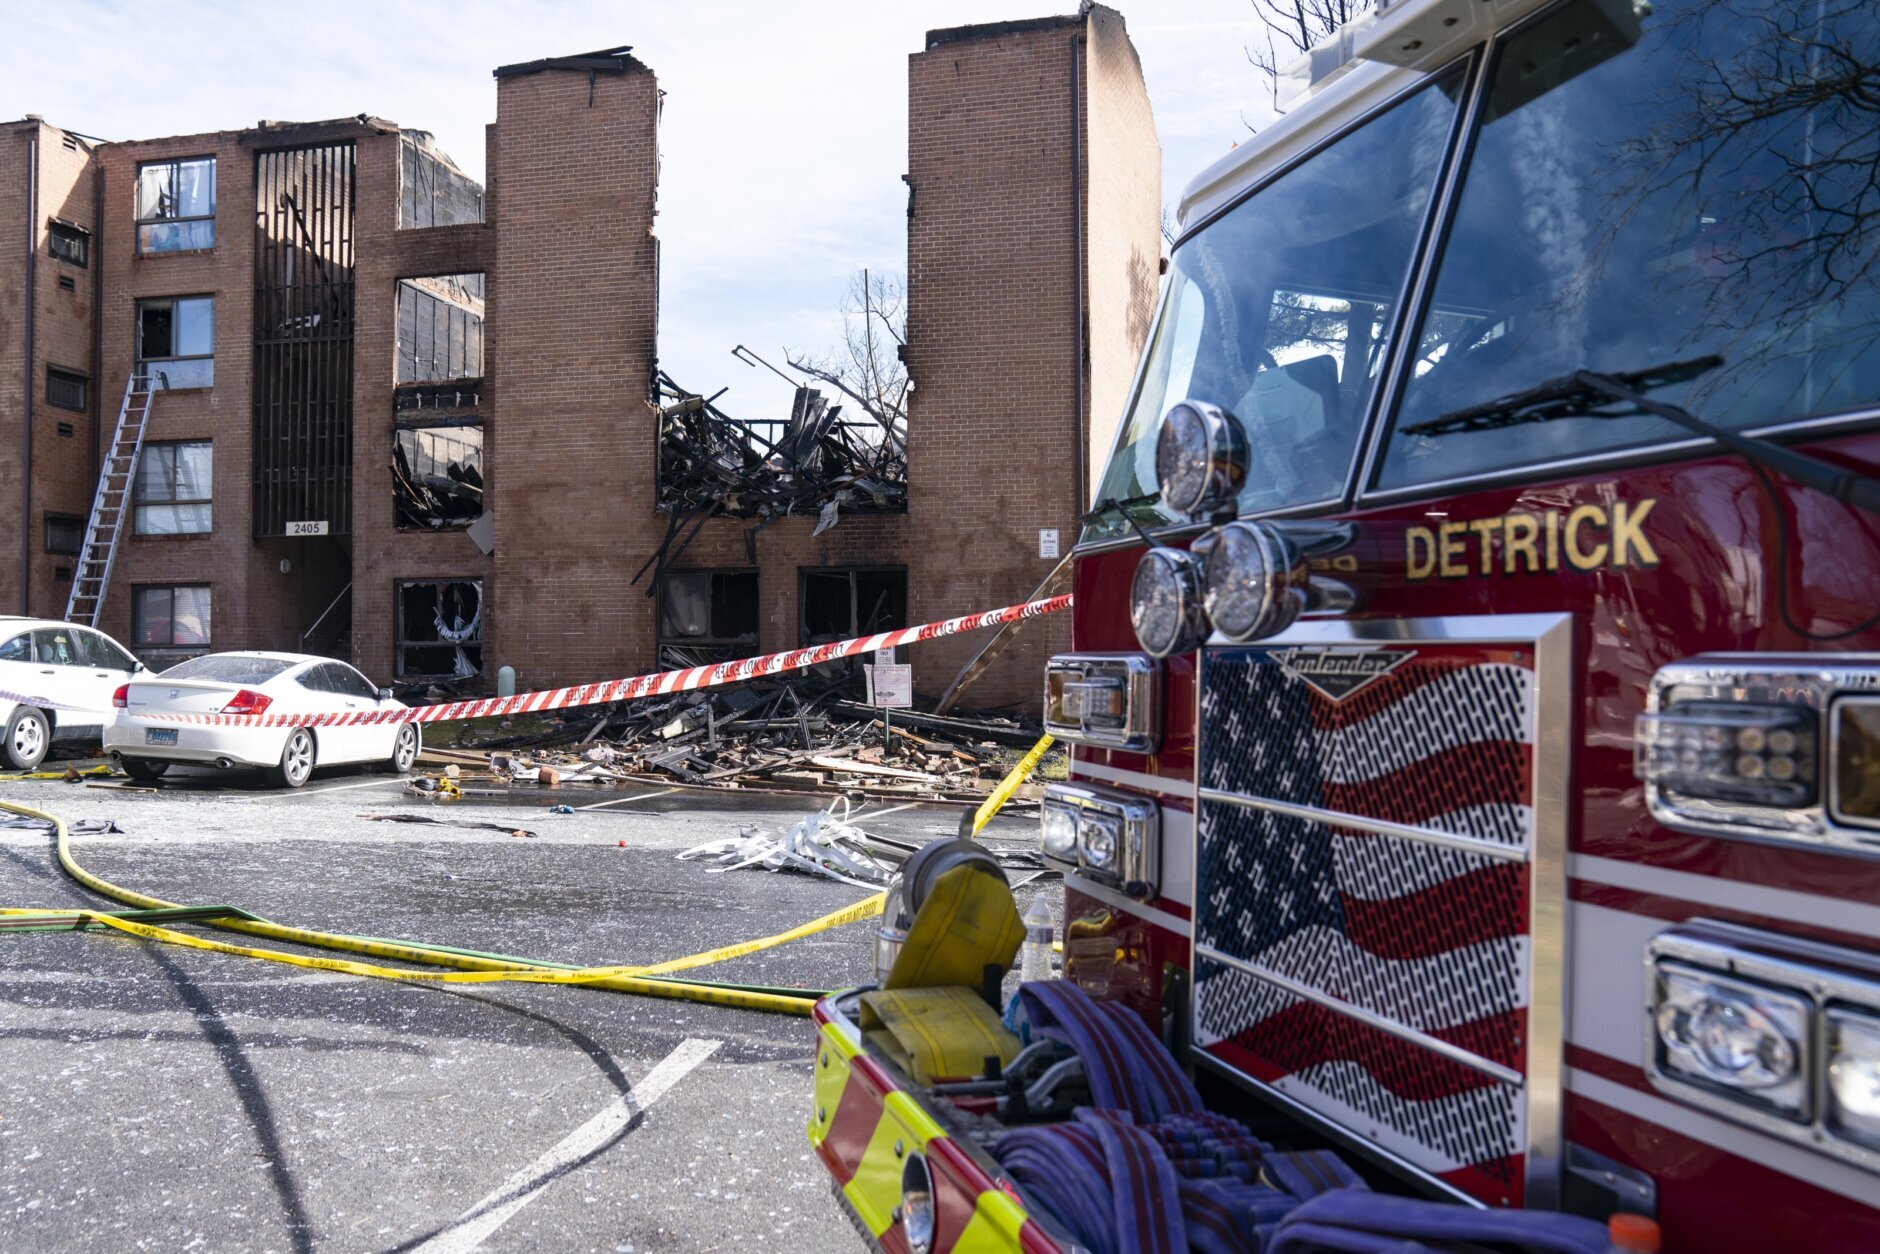 Charred rubble is seen after an apartment building collapsed after an explosion this morning in Silver Spring, Md., Thursday, March, 3, 2022. Montgomery County Fire and Rescue Service reports that multiple people were critically hurt in the fire that started at about 10:30 a.m. at a four-story building at the Friendly Garden Apartments in Silver Spring, Md. (AP Photo/Alex Brandon)